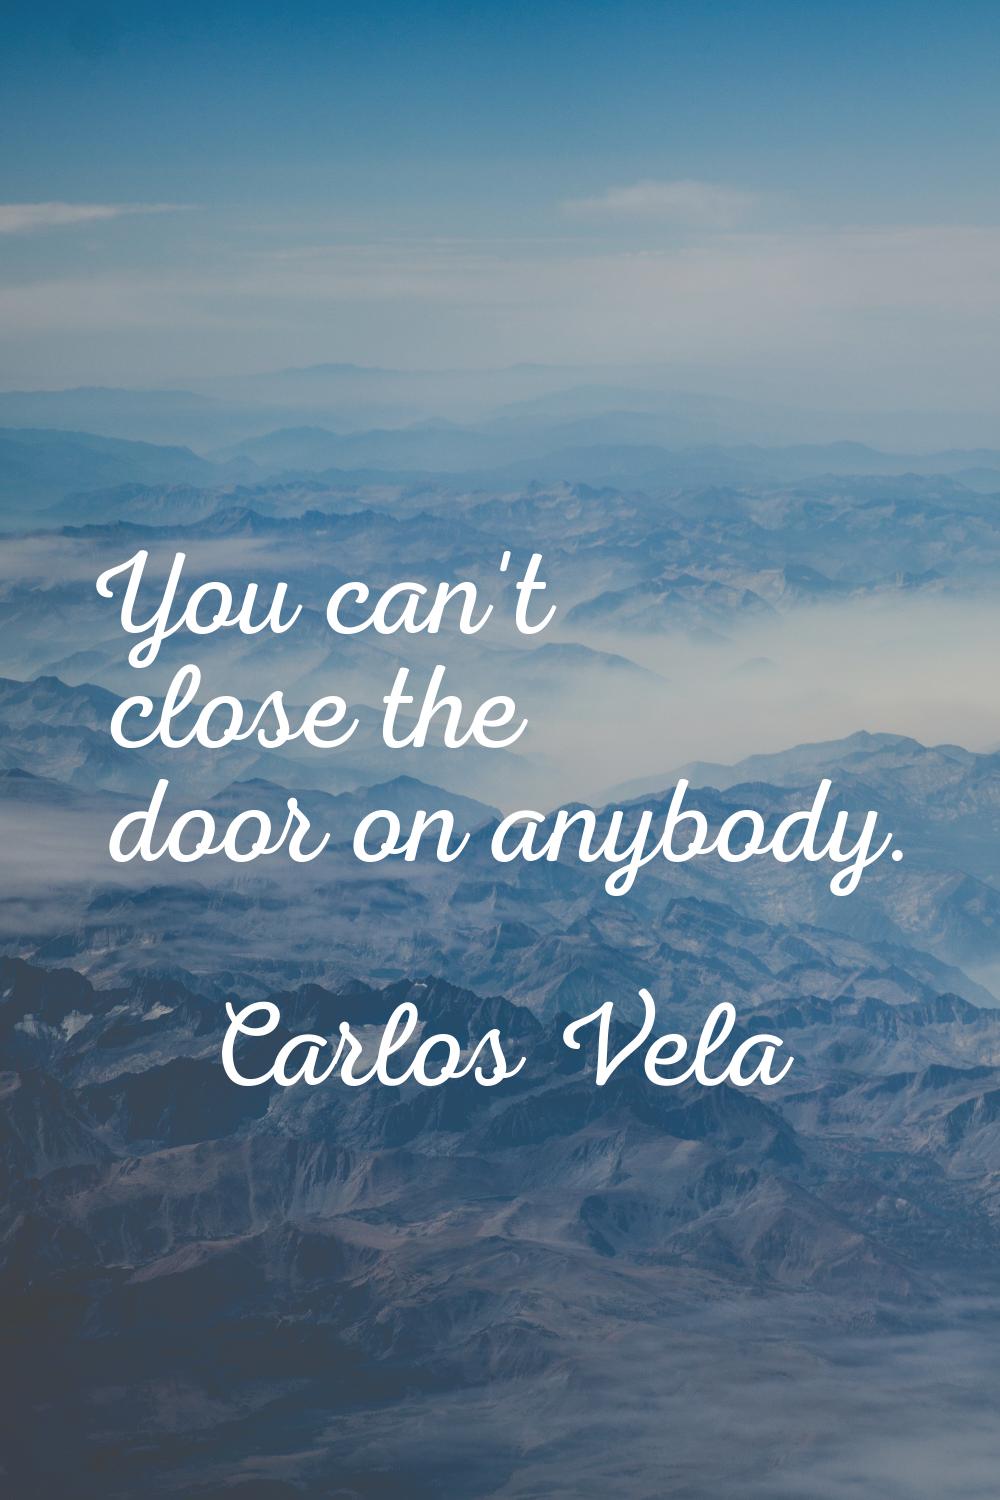 You can't close the door on anybody.